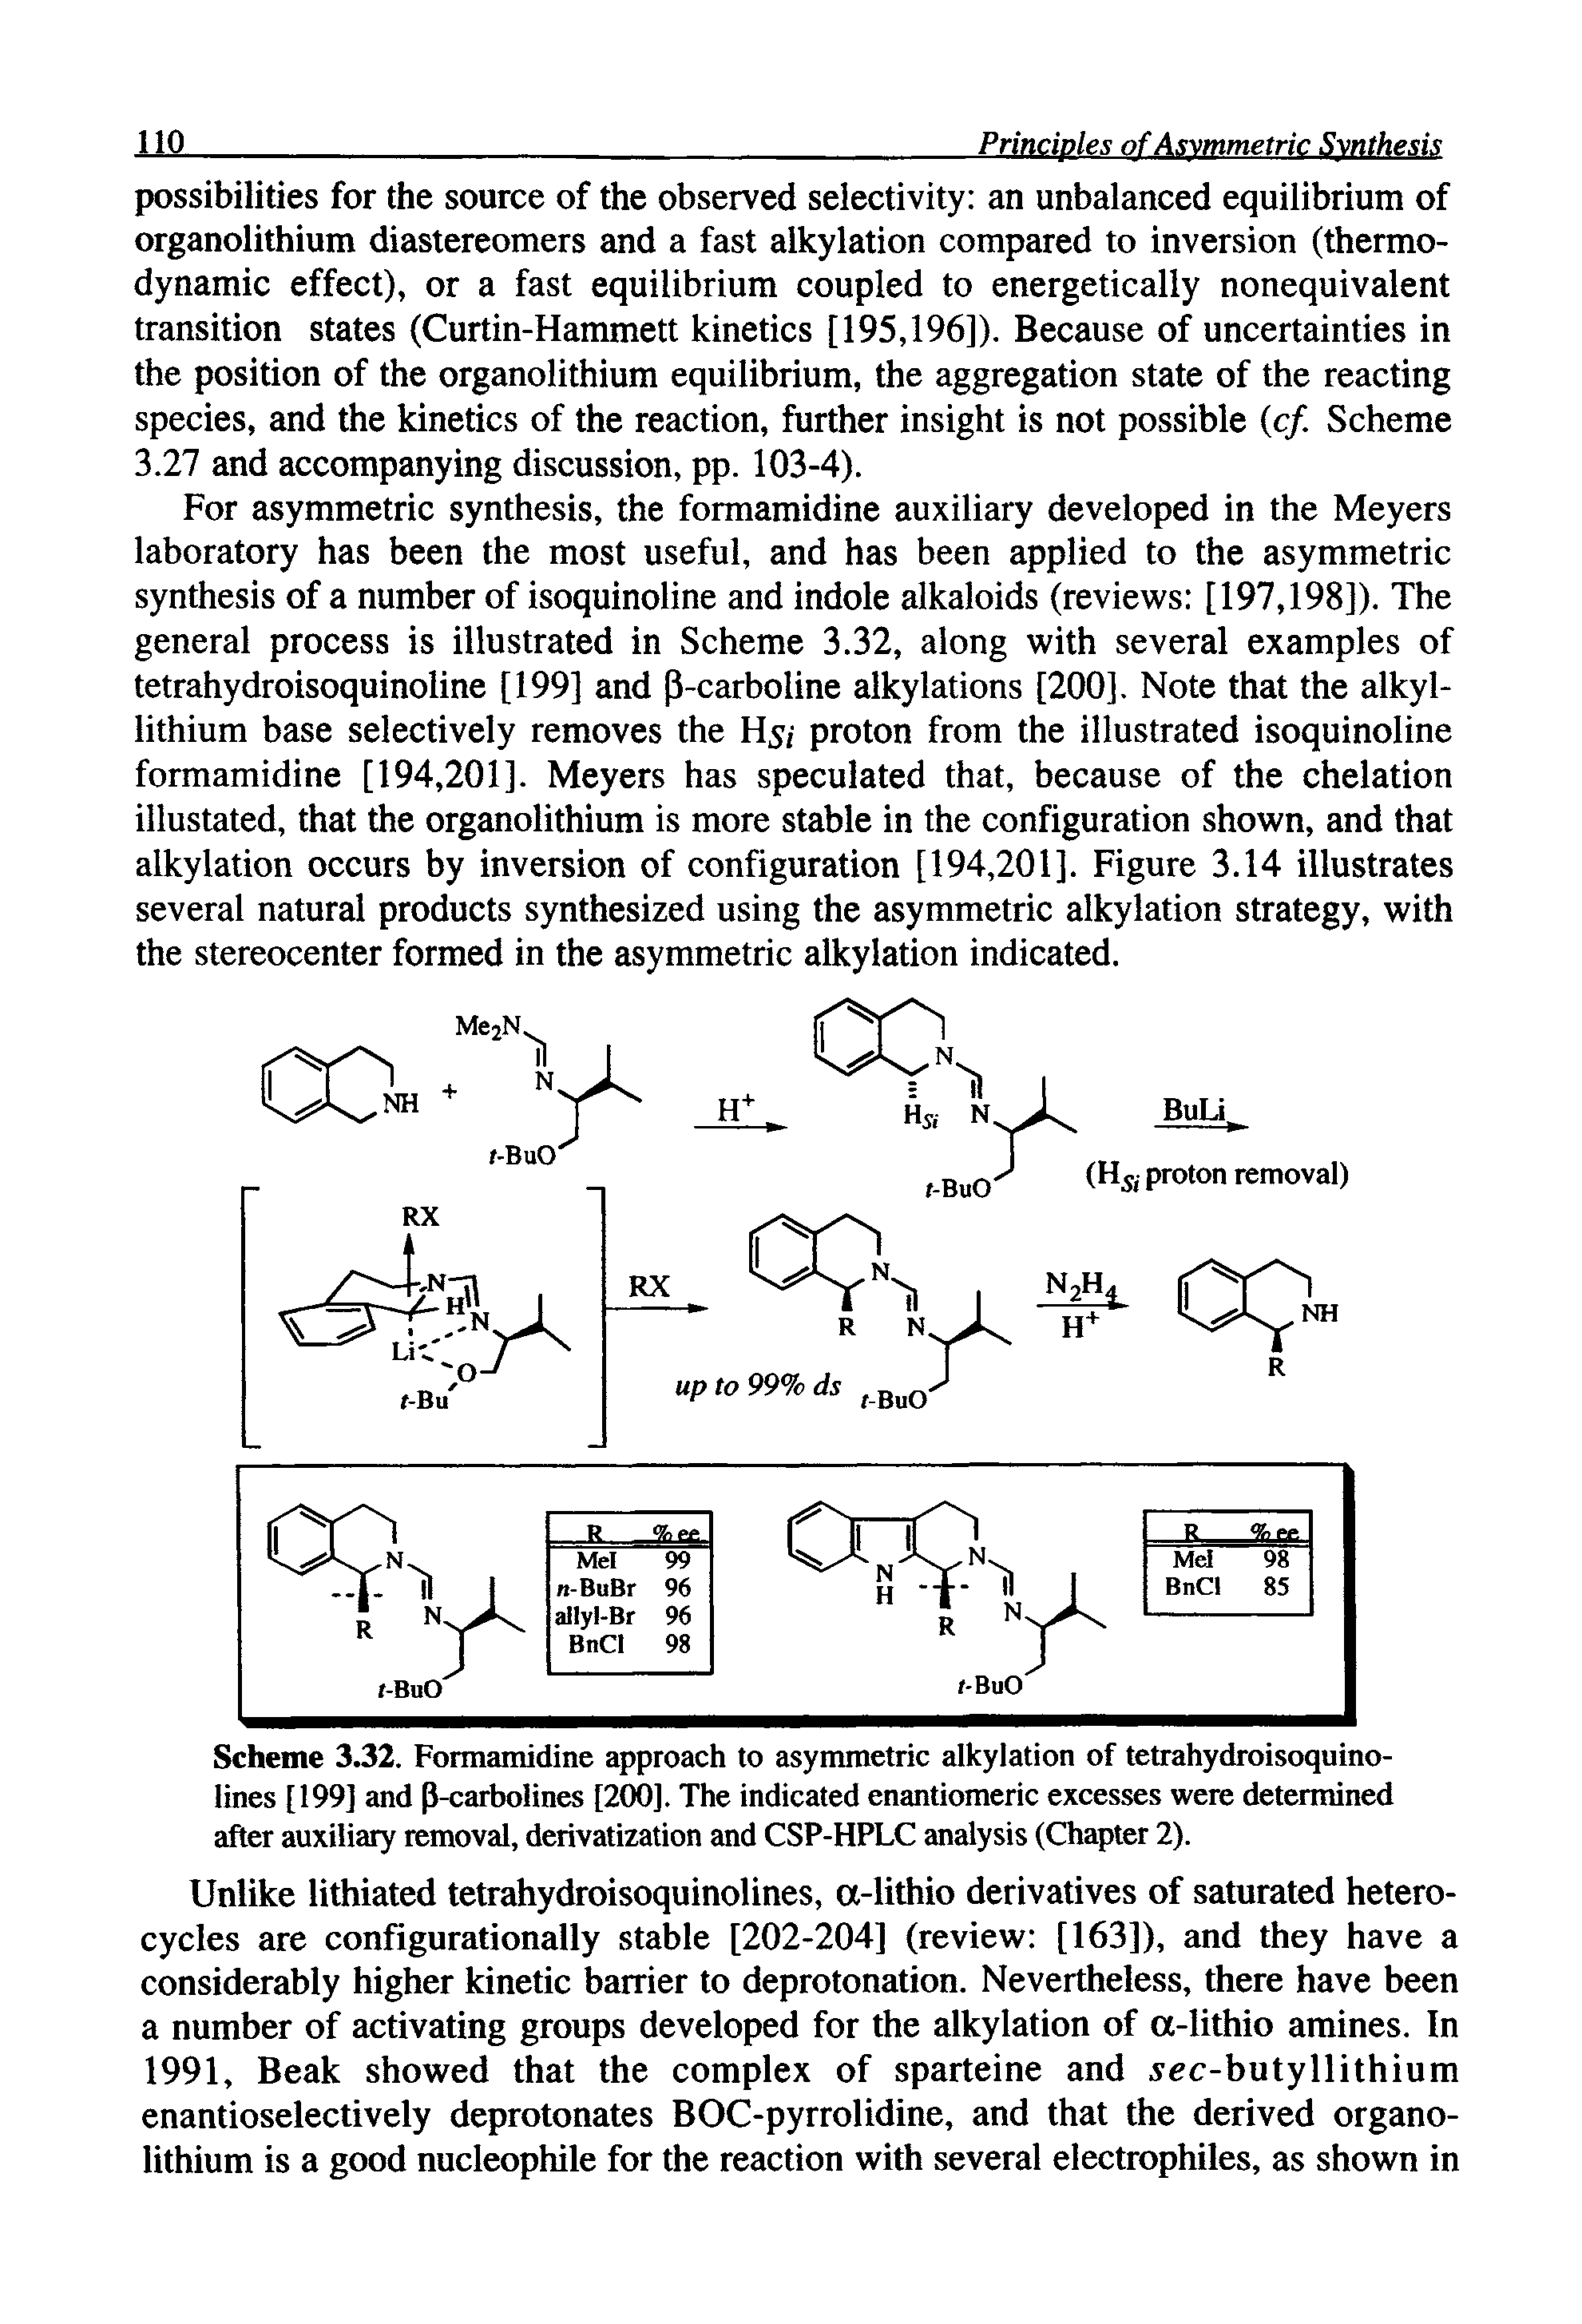 Scheme 3.32. Formamidine approach to asymmetric alkylation of tetrahydroisoquino-lines [199] and P-carbolines [200]. The indicated enantiomeric excesses were determined after auxiliary removal, derivatization and CSP-HPLC analysis (Chapter 2).